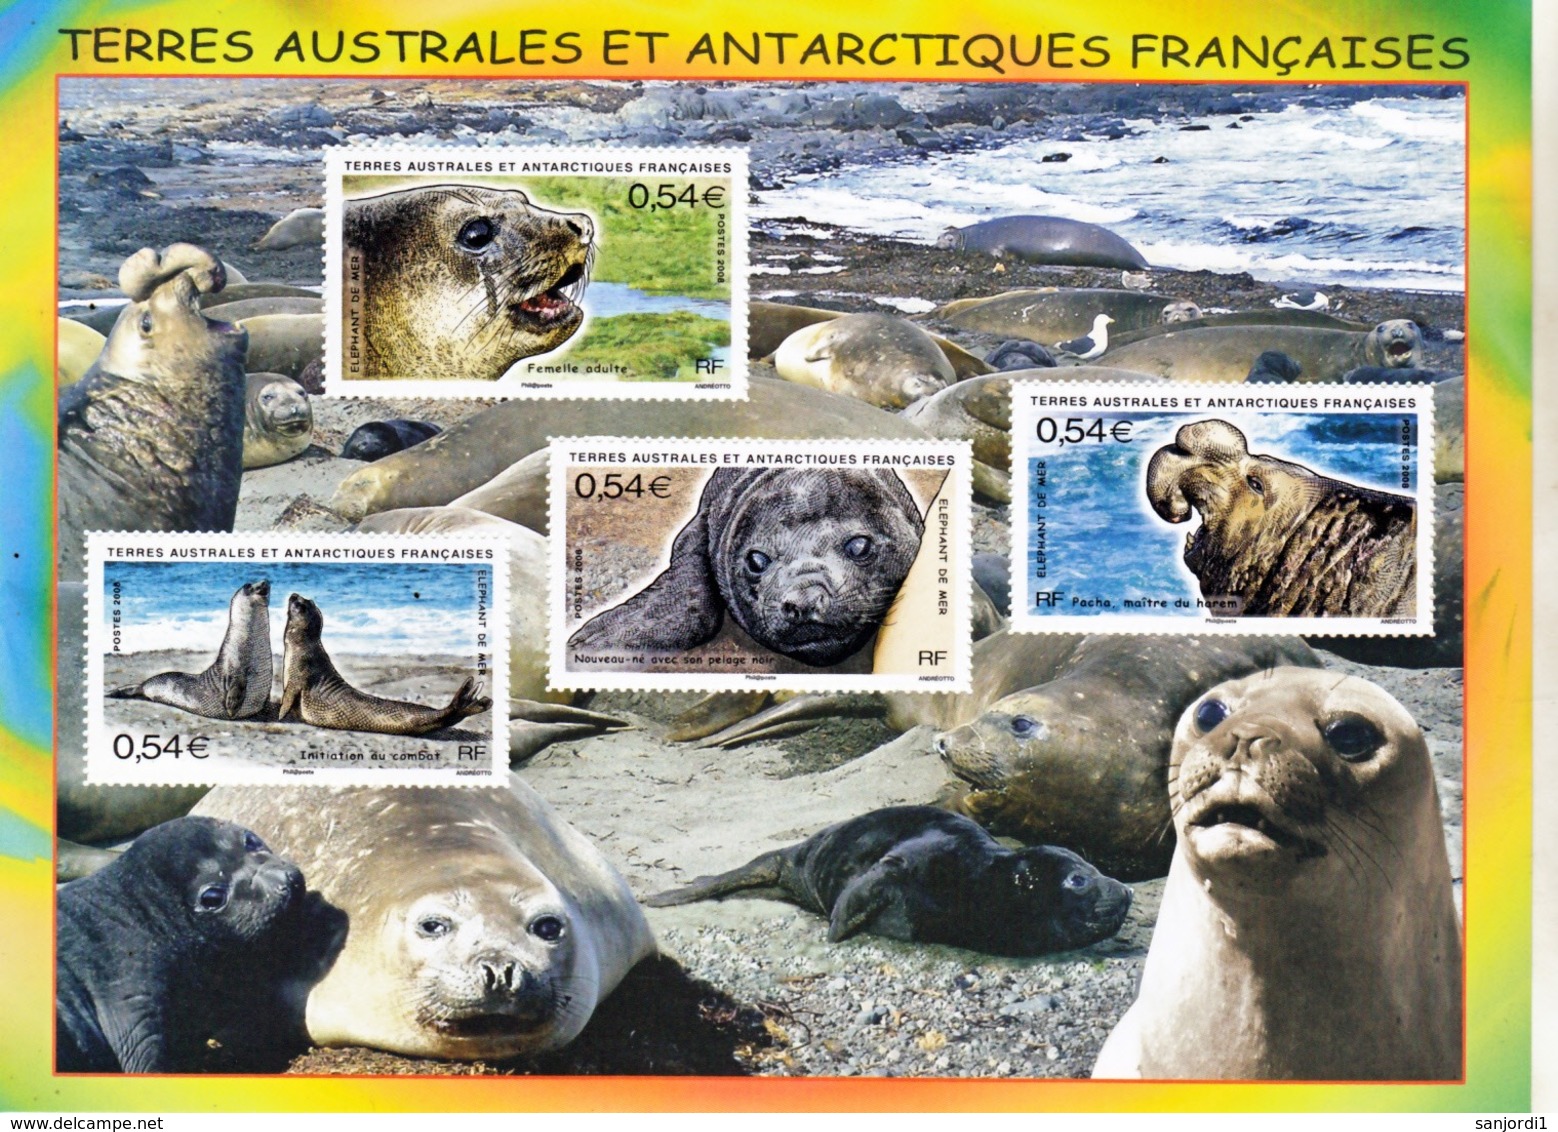 TAAF 2008 Année Complète Avec BF  Neuf ** TB MNH Sin Charnela - Annate Complete